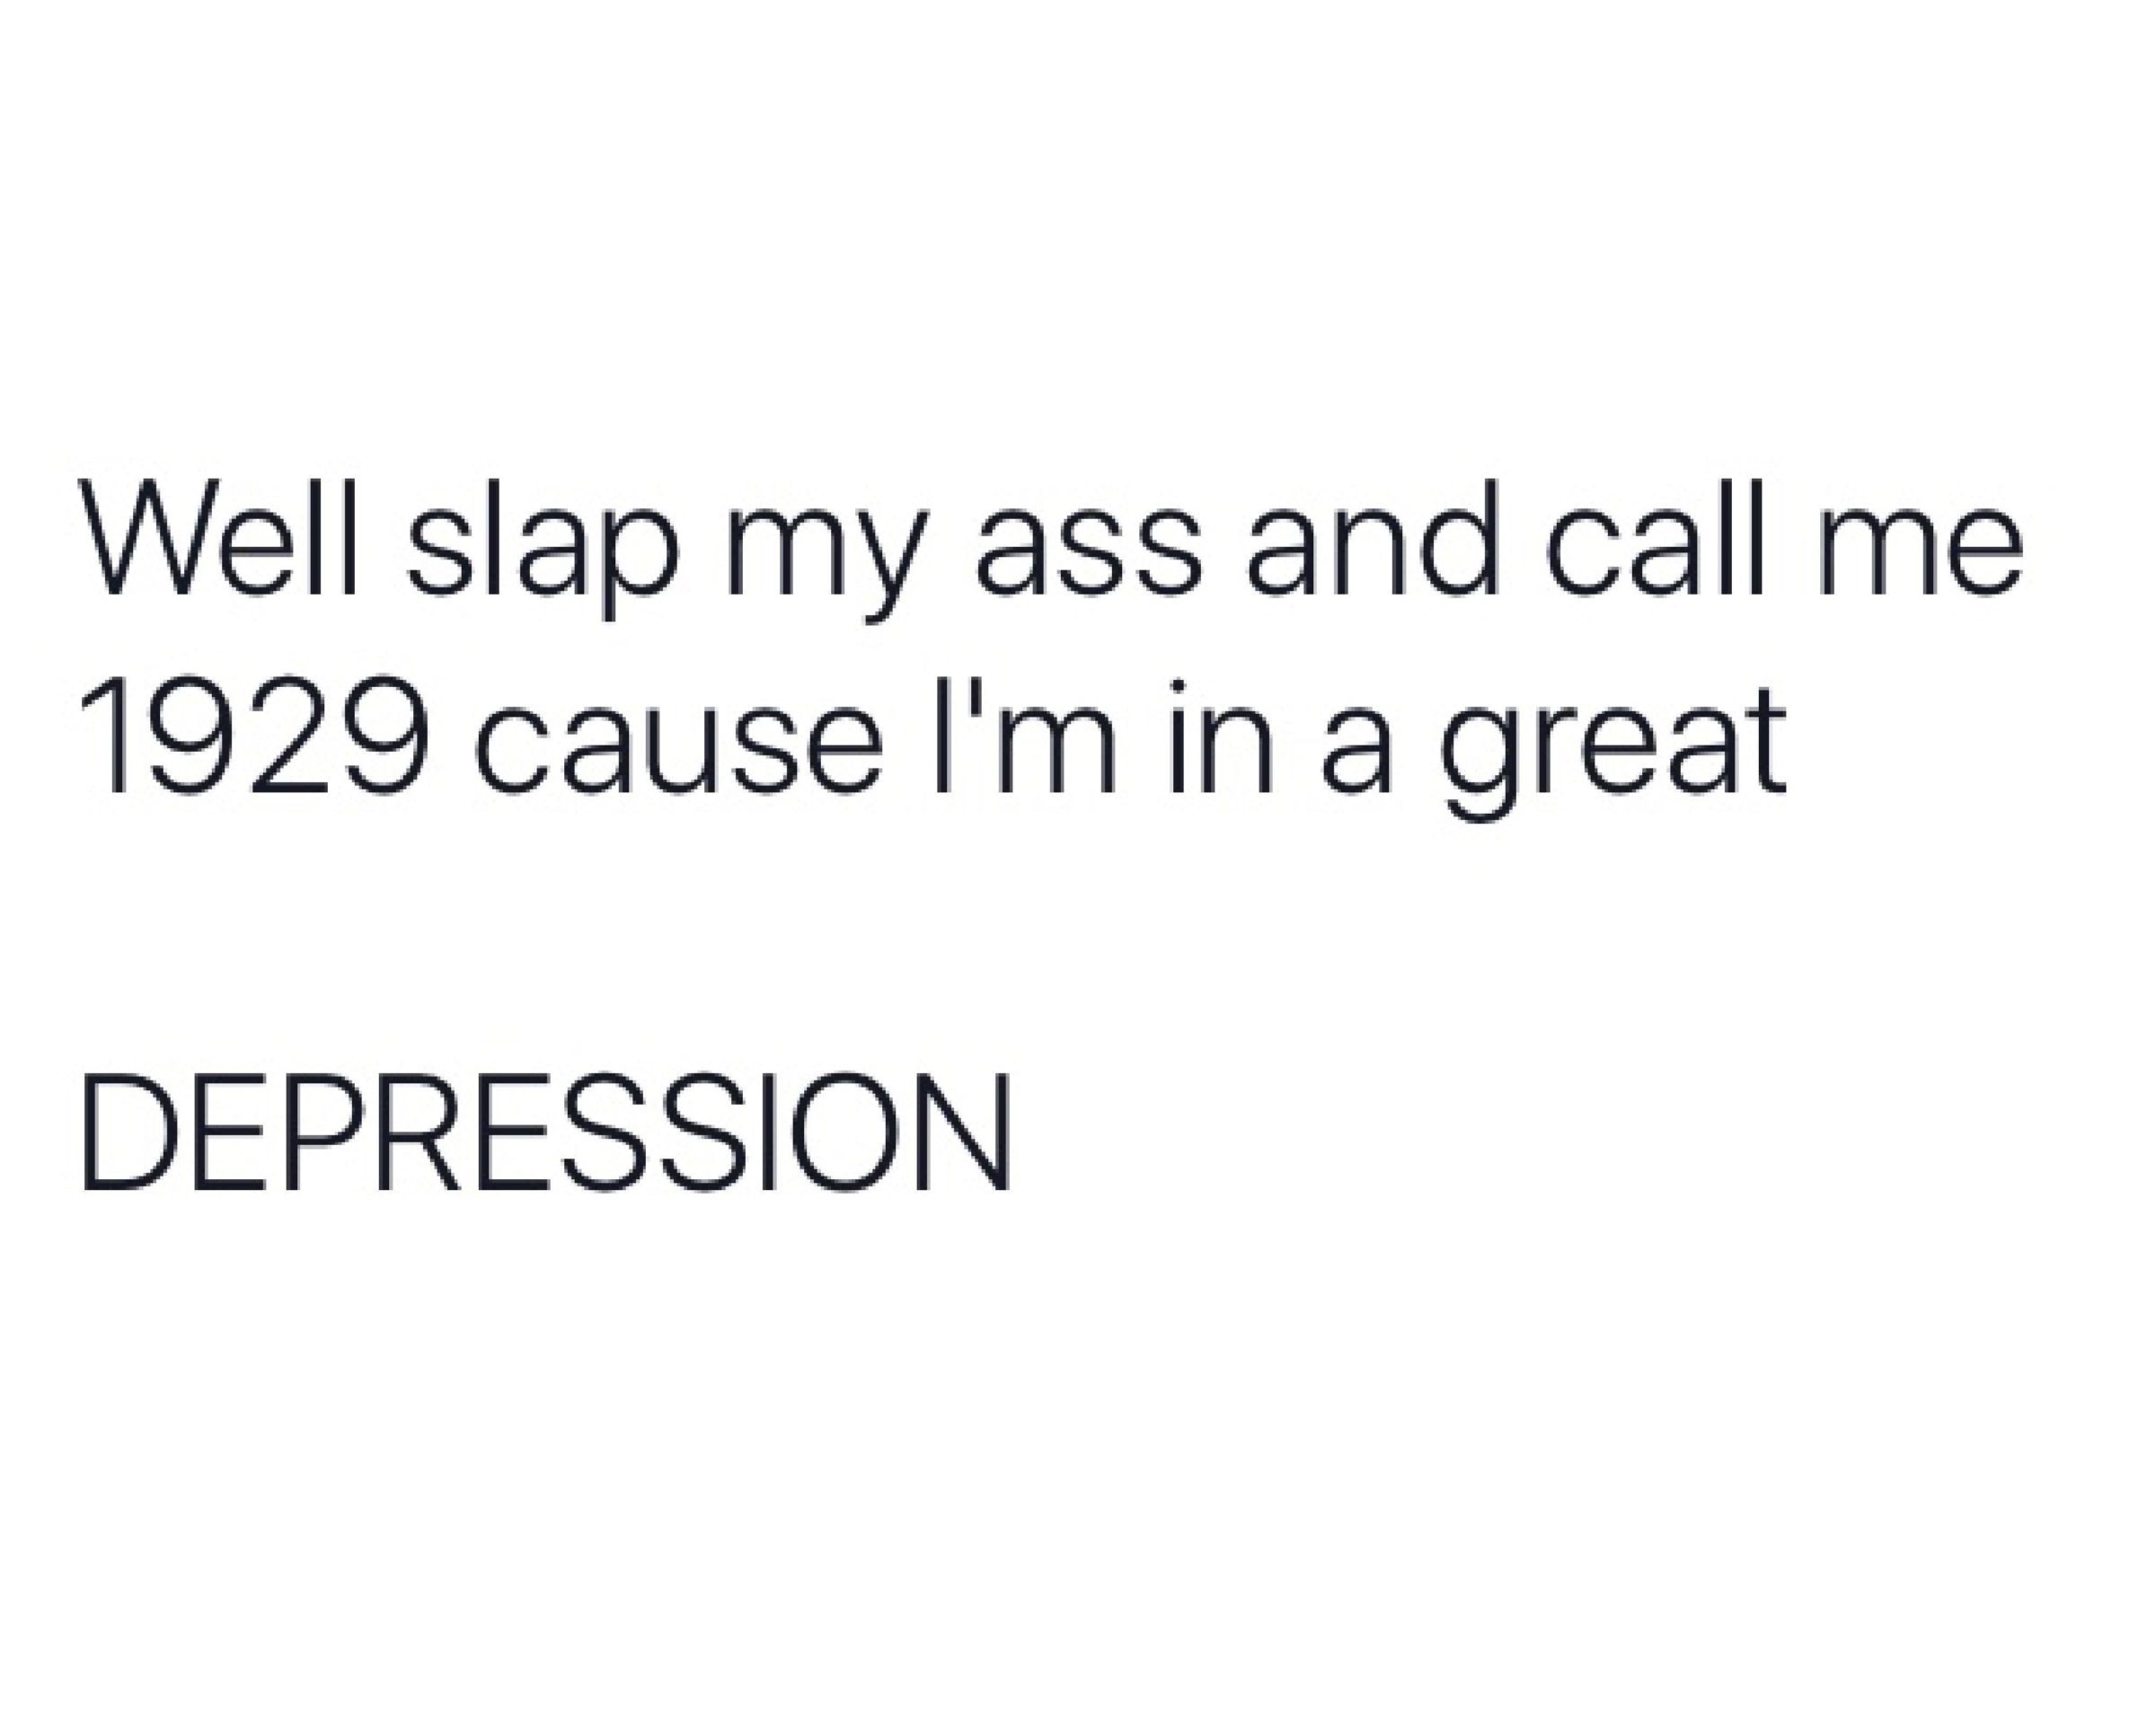 depression depression-memes depression text: Well slap my ass and call me 1929 cause 11m in a great DEPRESSION 